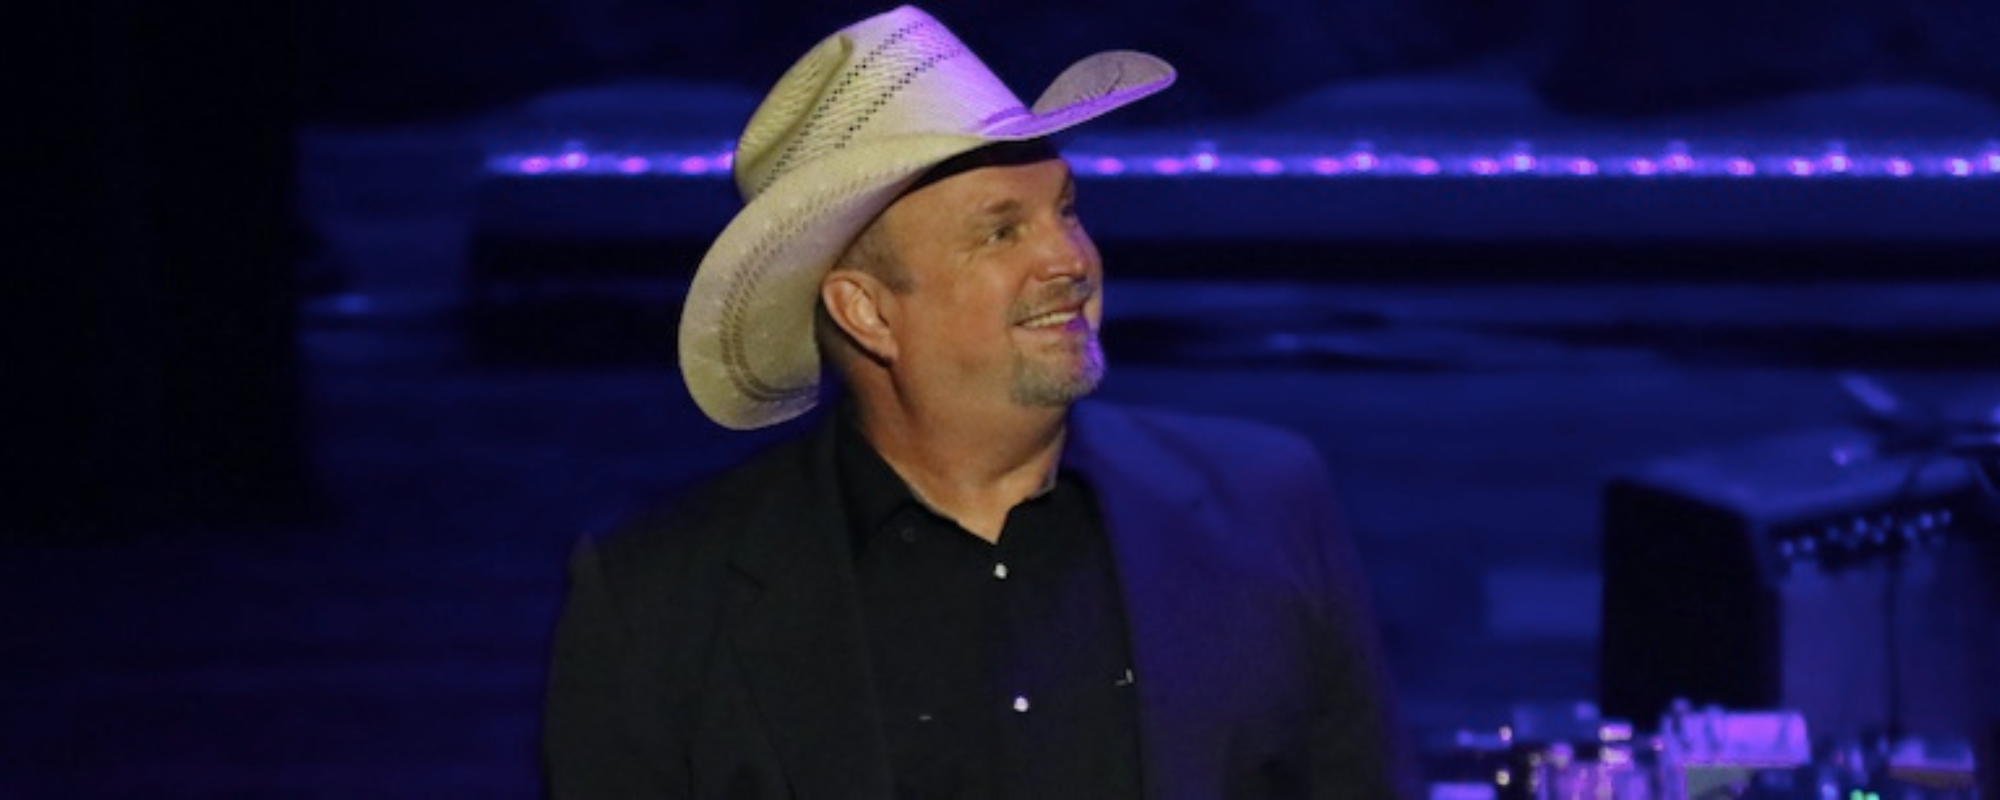 Garth Brooks Teams with Ronnie Dunn for ’90s Country Throwback Track “Rodeo Man” from His New Album ‘Time Traveler’